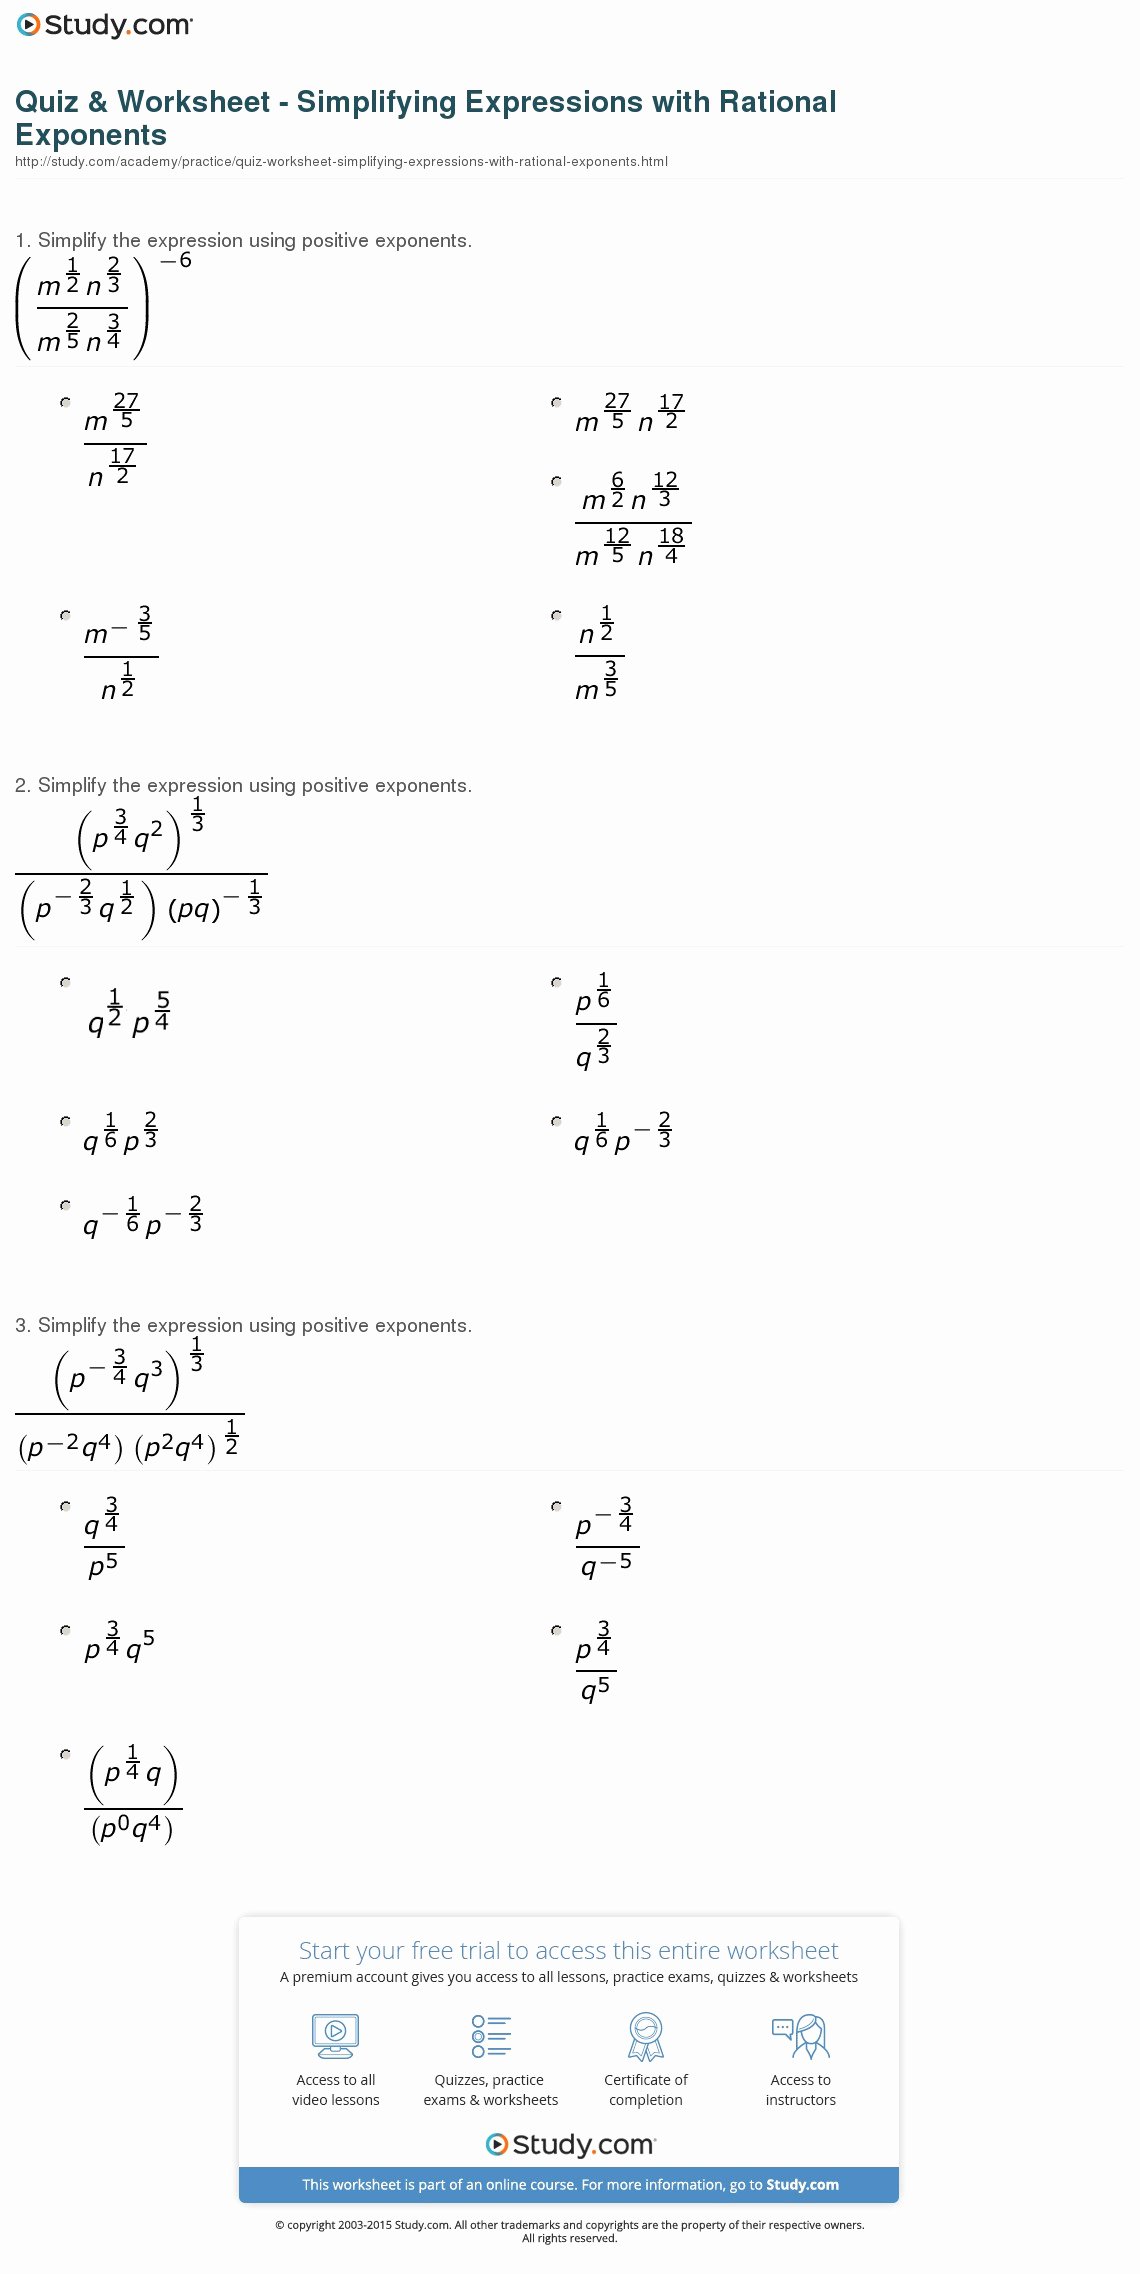 Simplifying Rational Expressions Worksheet Answers Unique Quiz &amp; Worksheet Simplifying Expressions with Rational